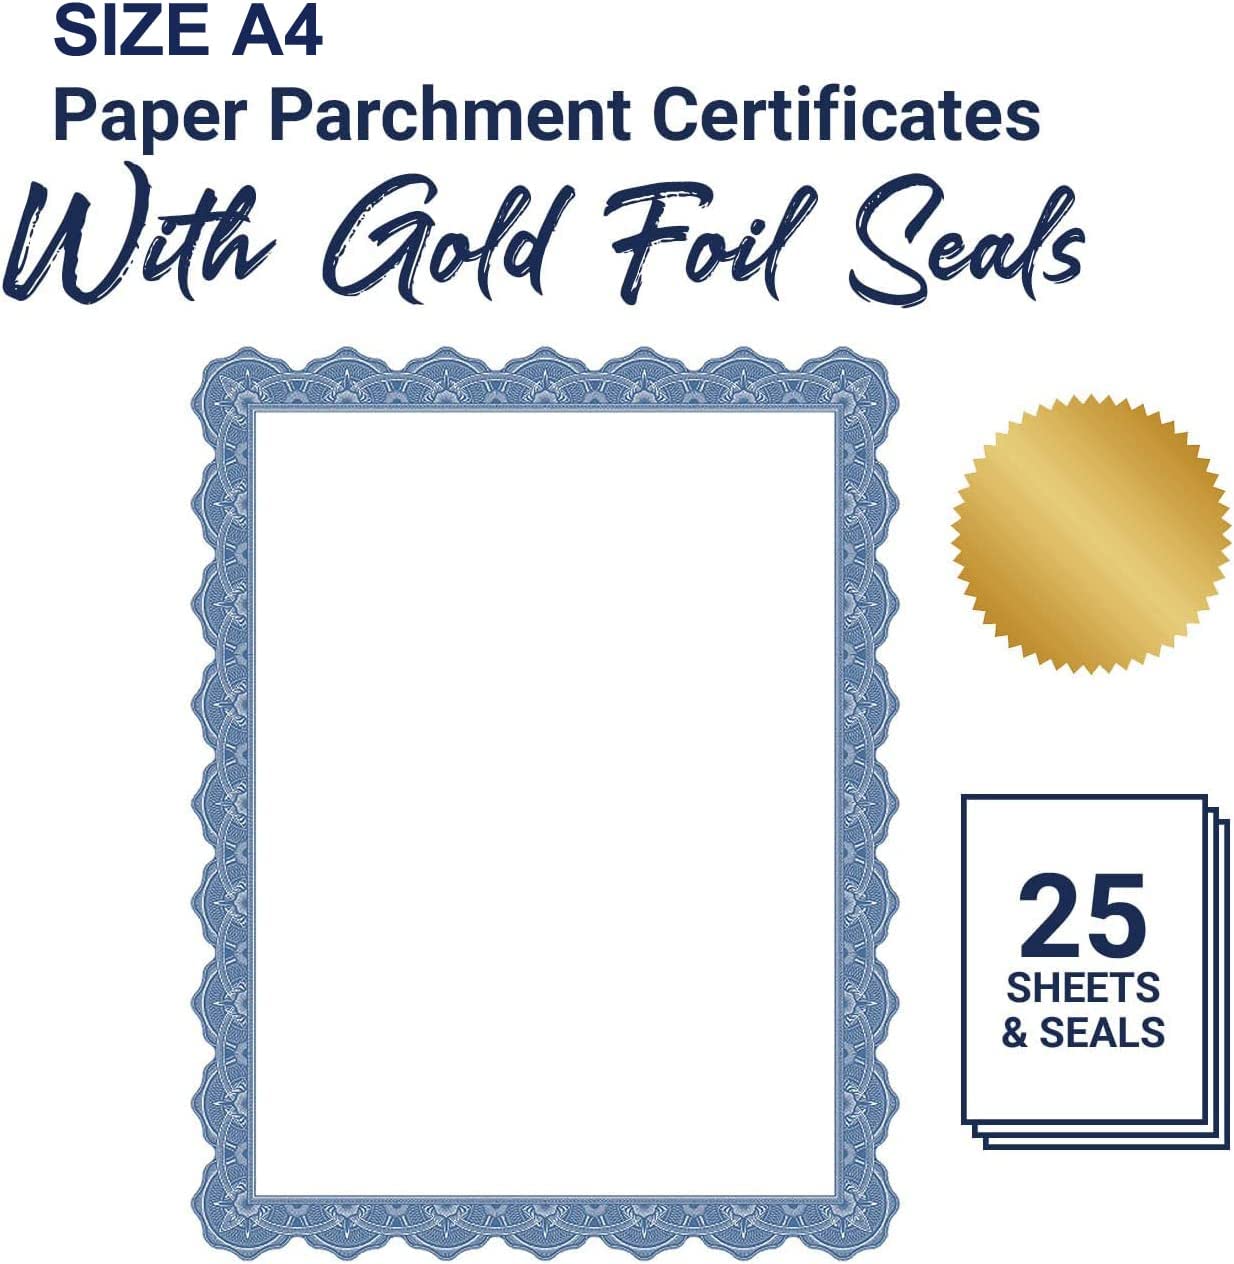 Blank certificate paper containing a blue frame with a gold foil stamp